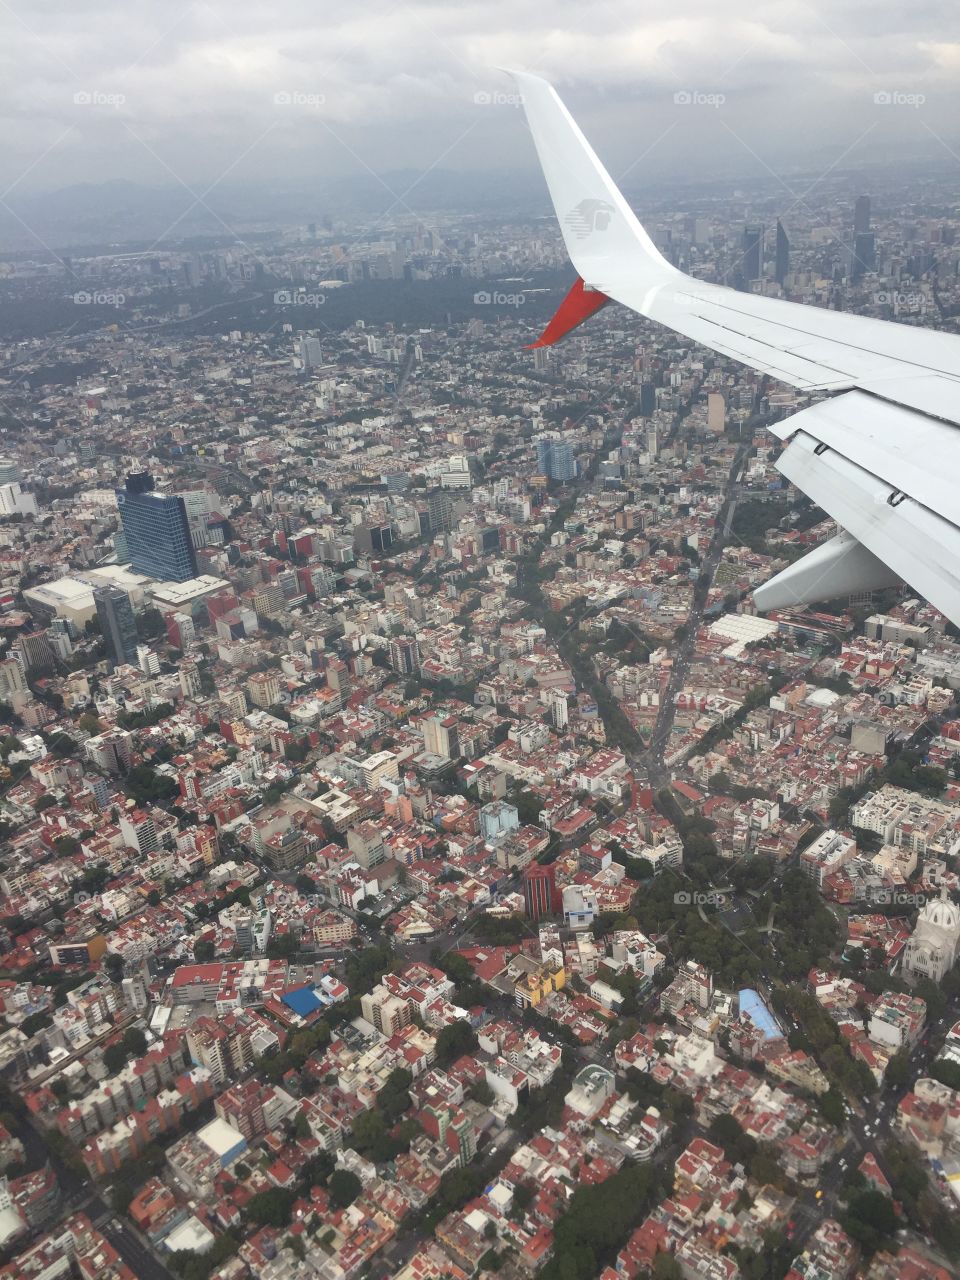 Flying over Mexico City, Mexico